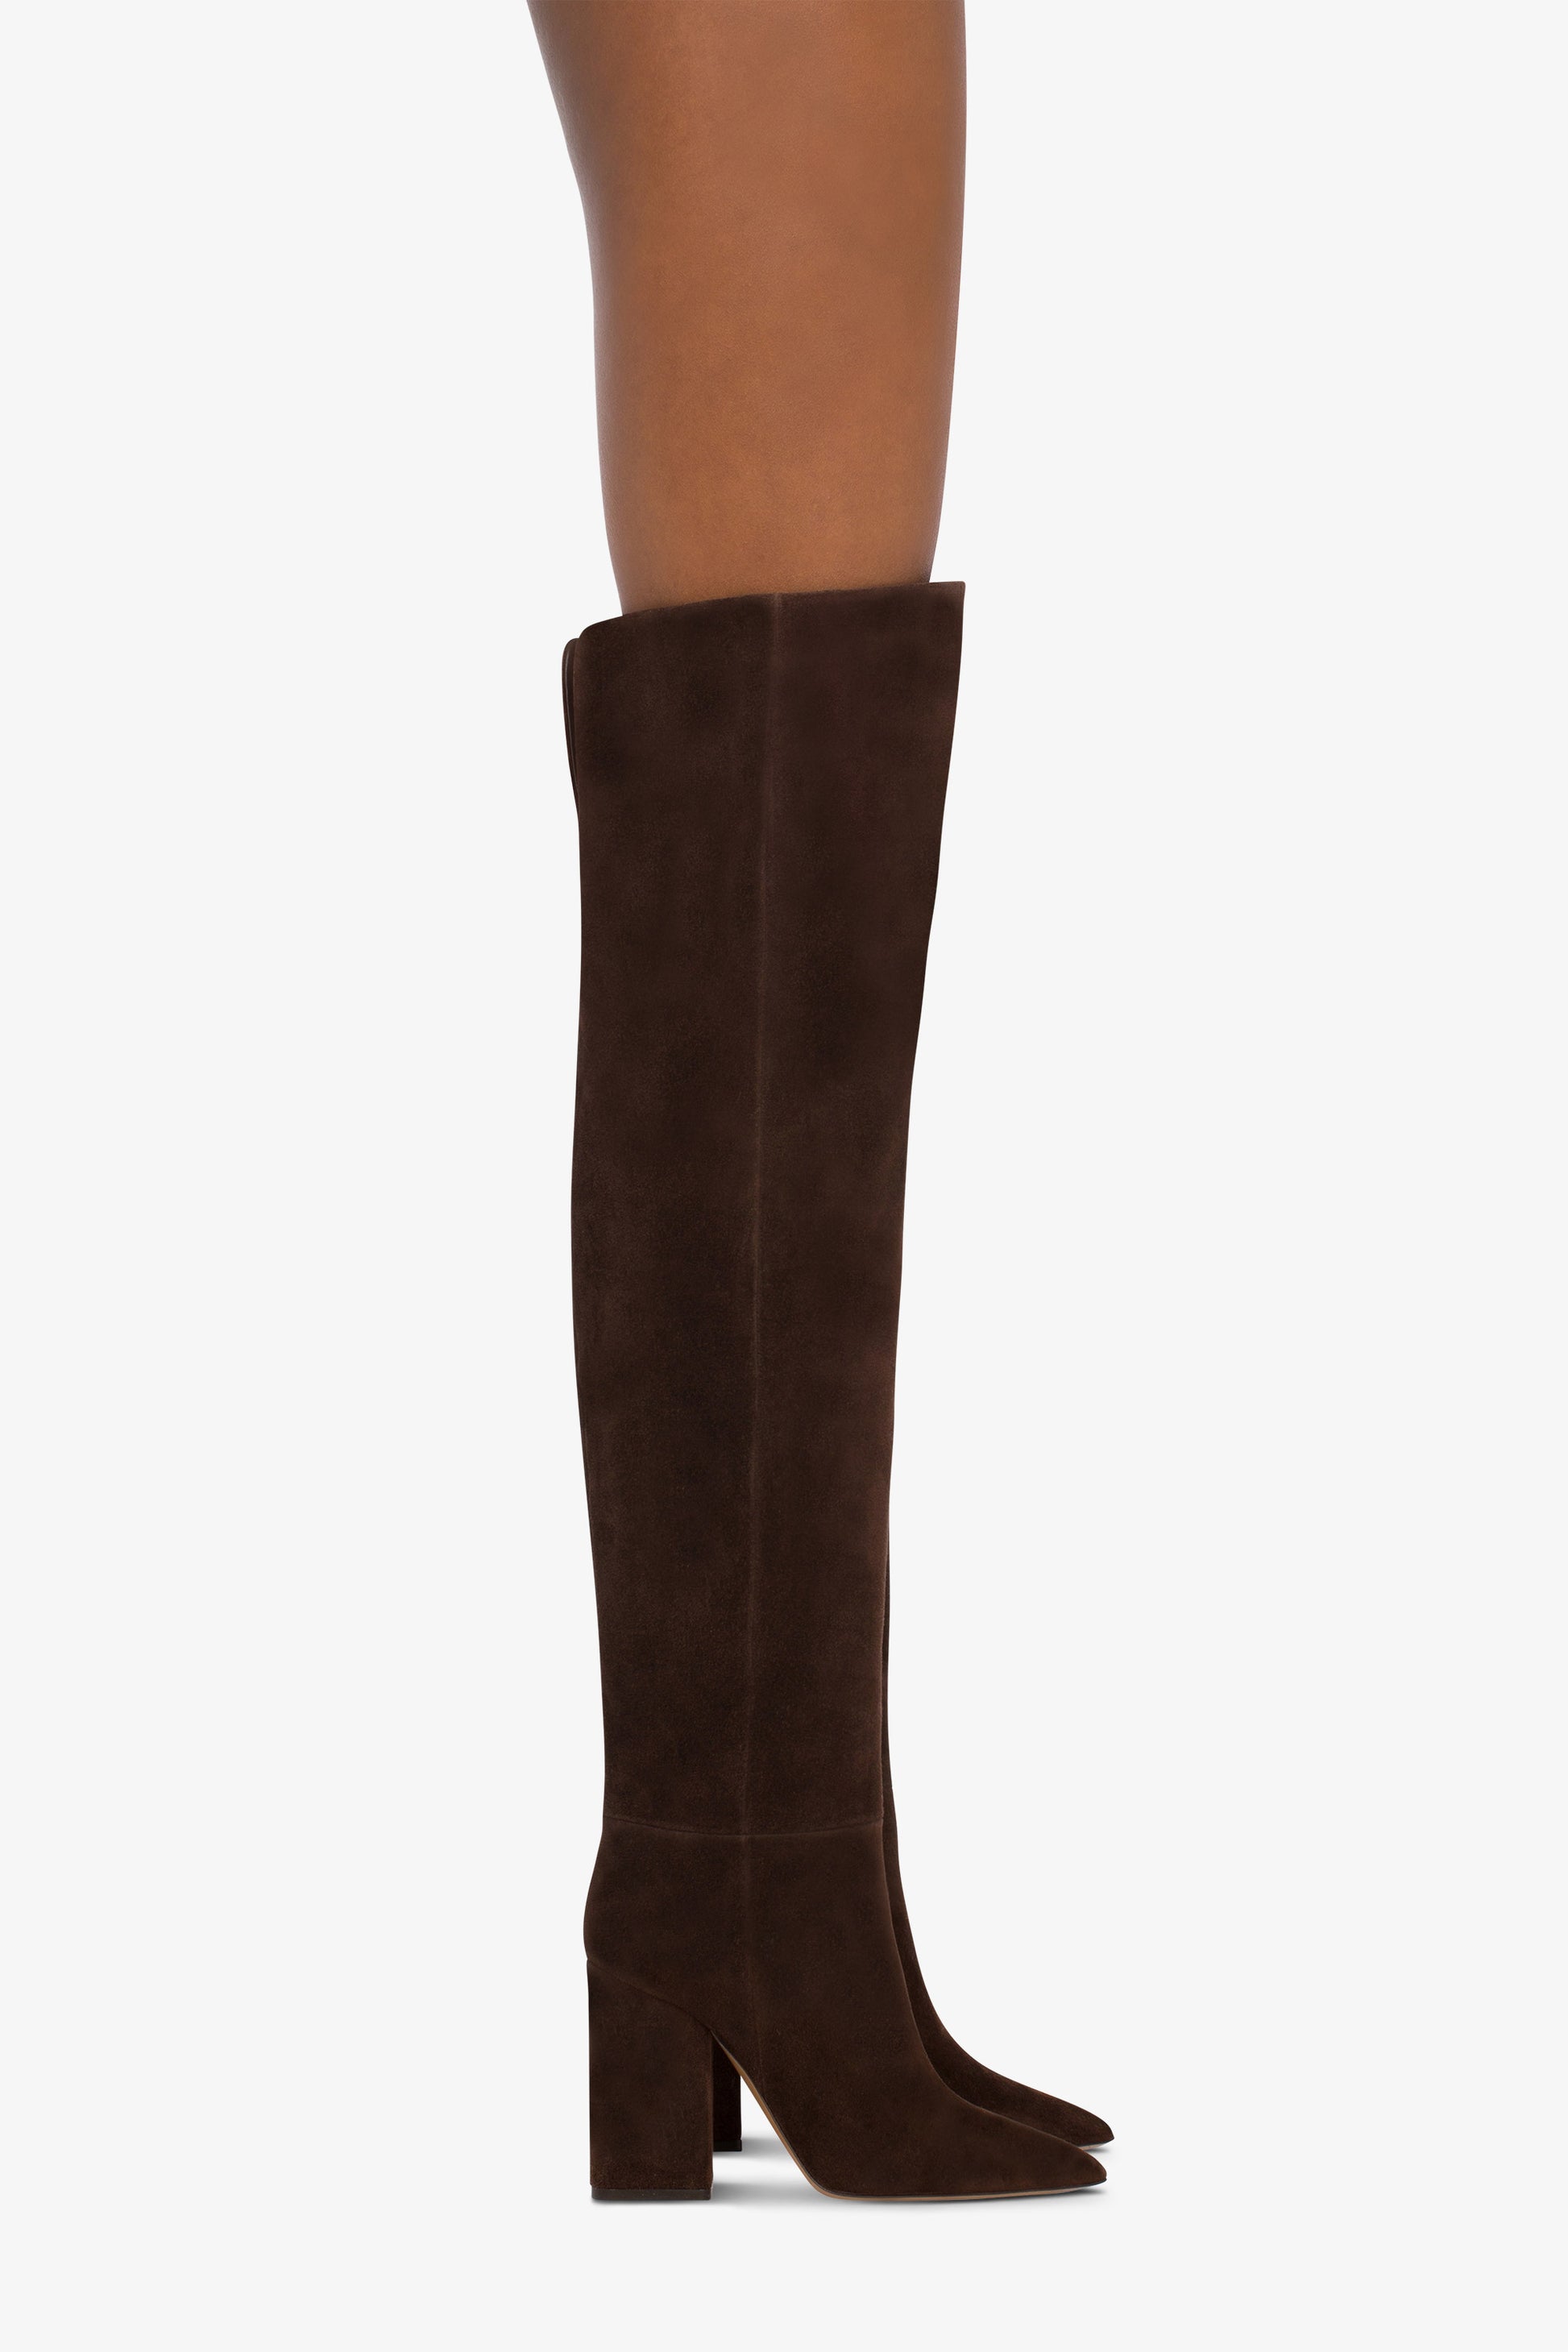 Over-the-knee, long pointed boots in soft pepper suede leather - Produkt getragen